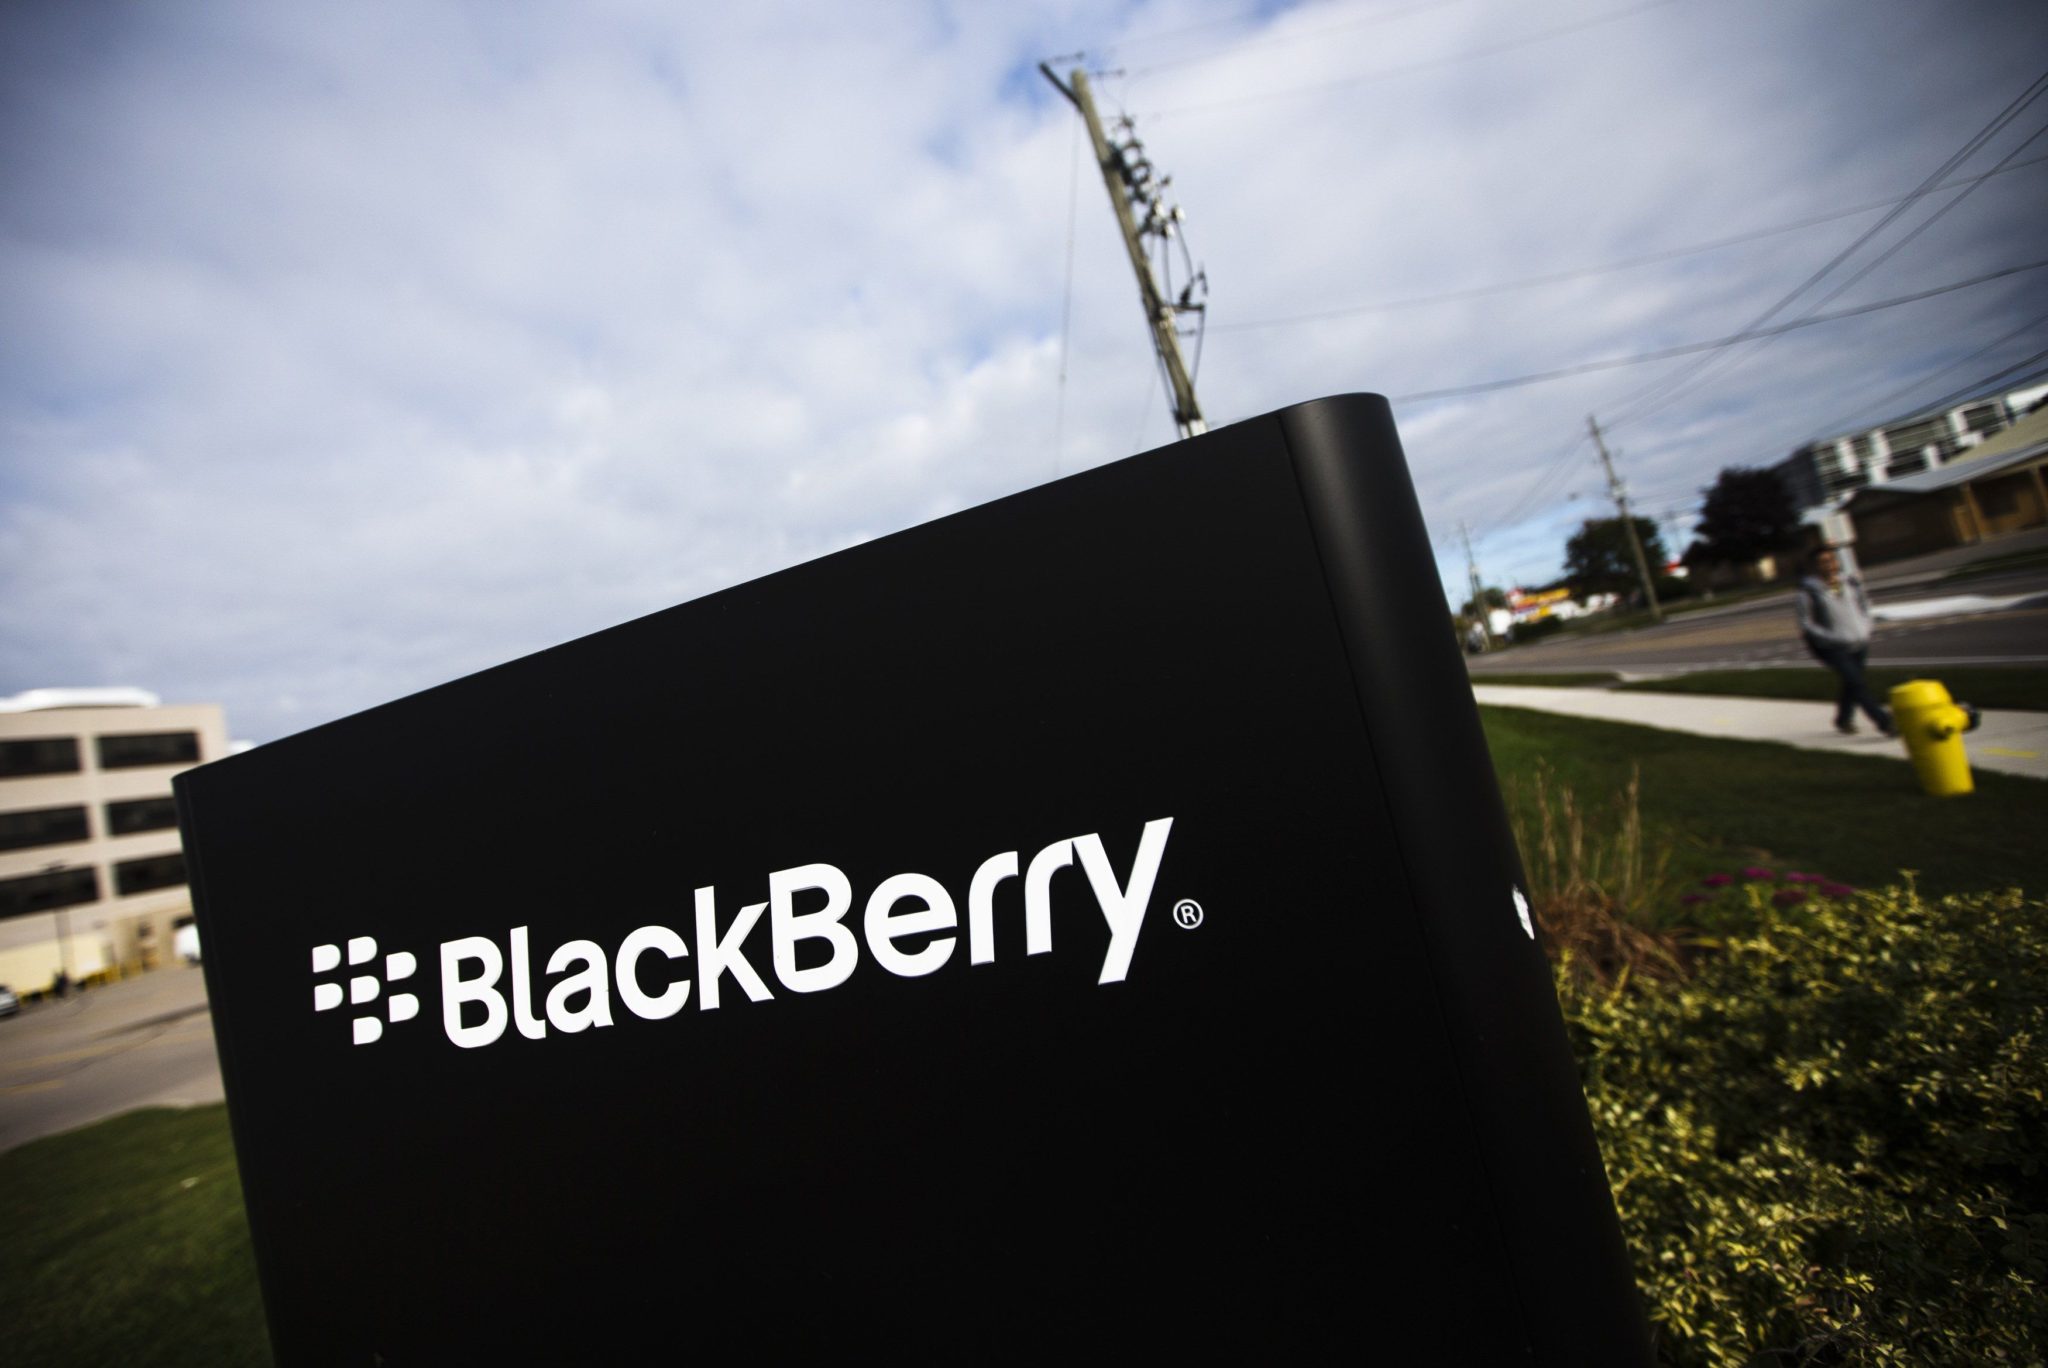 A man walks by a Blackberry sign at the Blackberry campus in Waterloo, September 23, 2013. Struggling smartphone maker BlackBerry on Monday signed a tentative deal to be acquired by a consortium led by its biggest shareholder, setting a $4.7 billion floor in the auction of the Canadian company that invented on-the-go email.   REUTERS/Mark Blinch (CANADA - Tags: BUSINESS SCIENCE TECHNOLOGY)